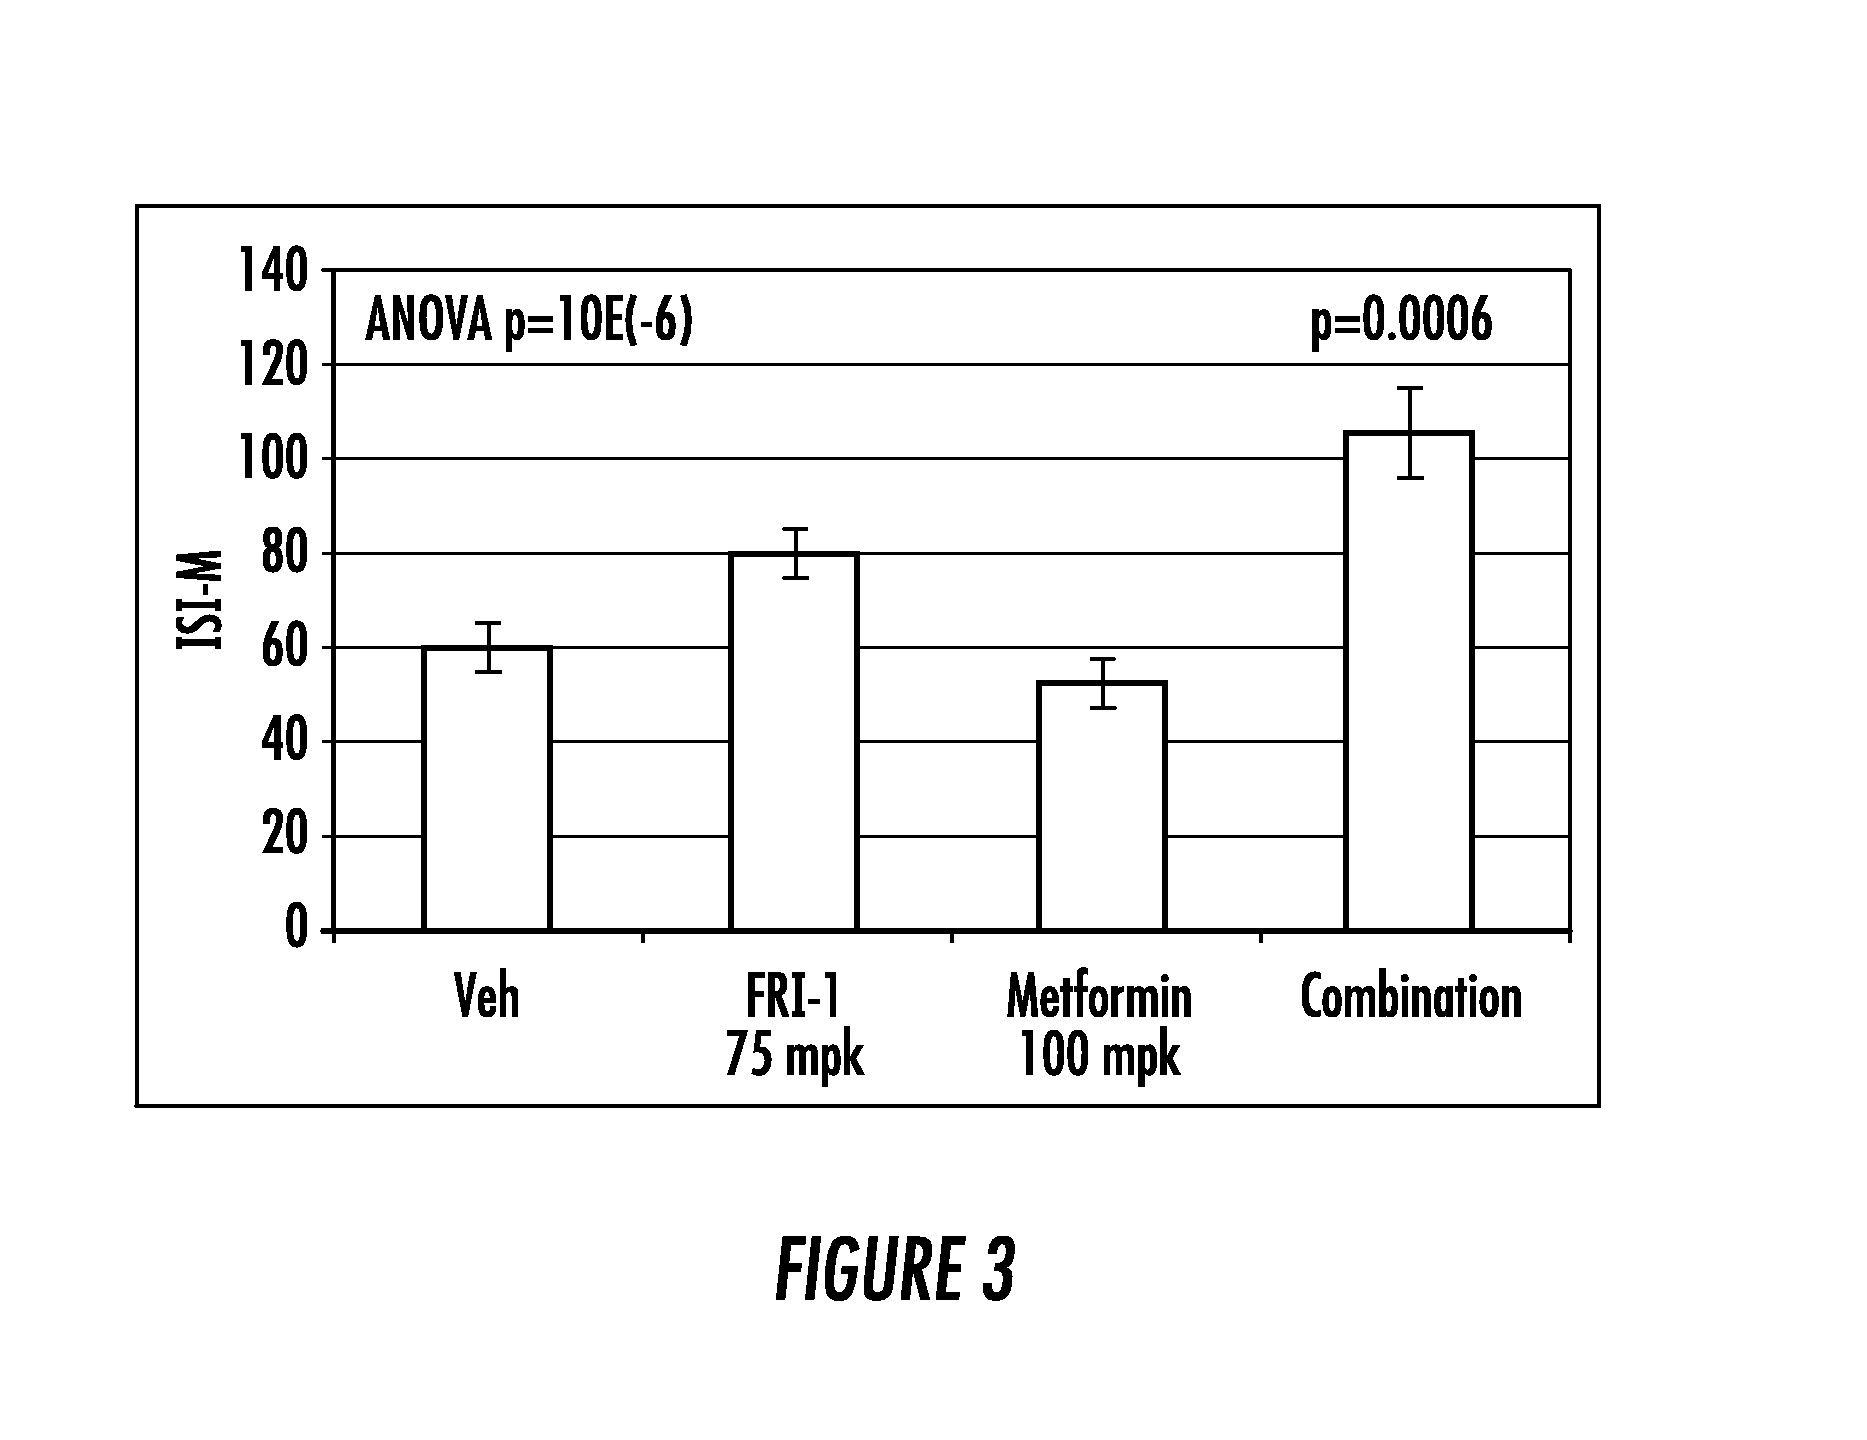 Glucokinase Activator Compositions for the Treatment of Diabetes